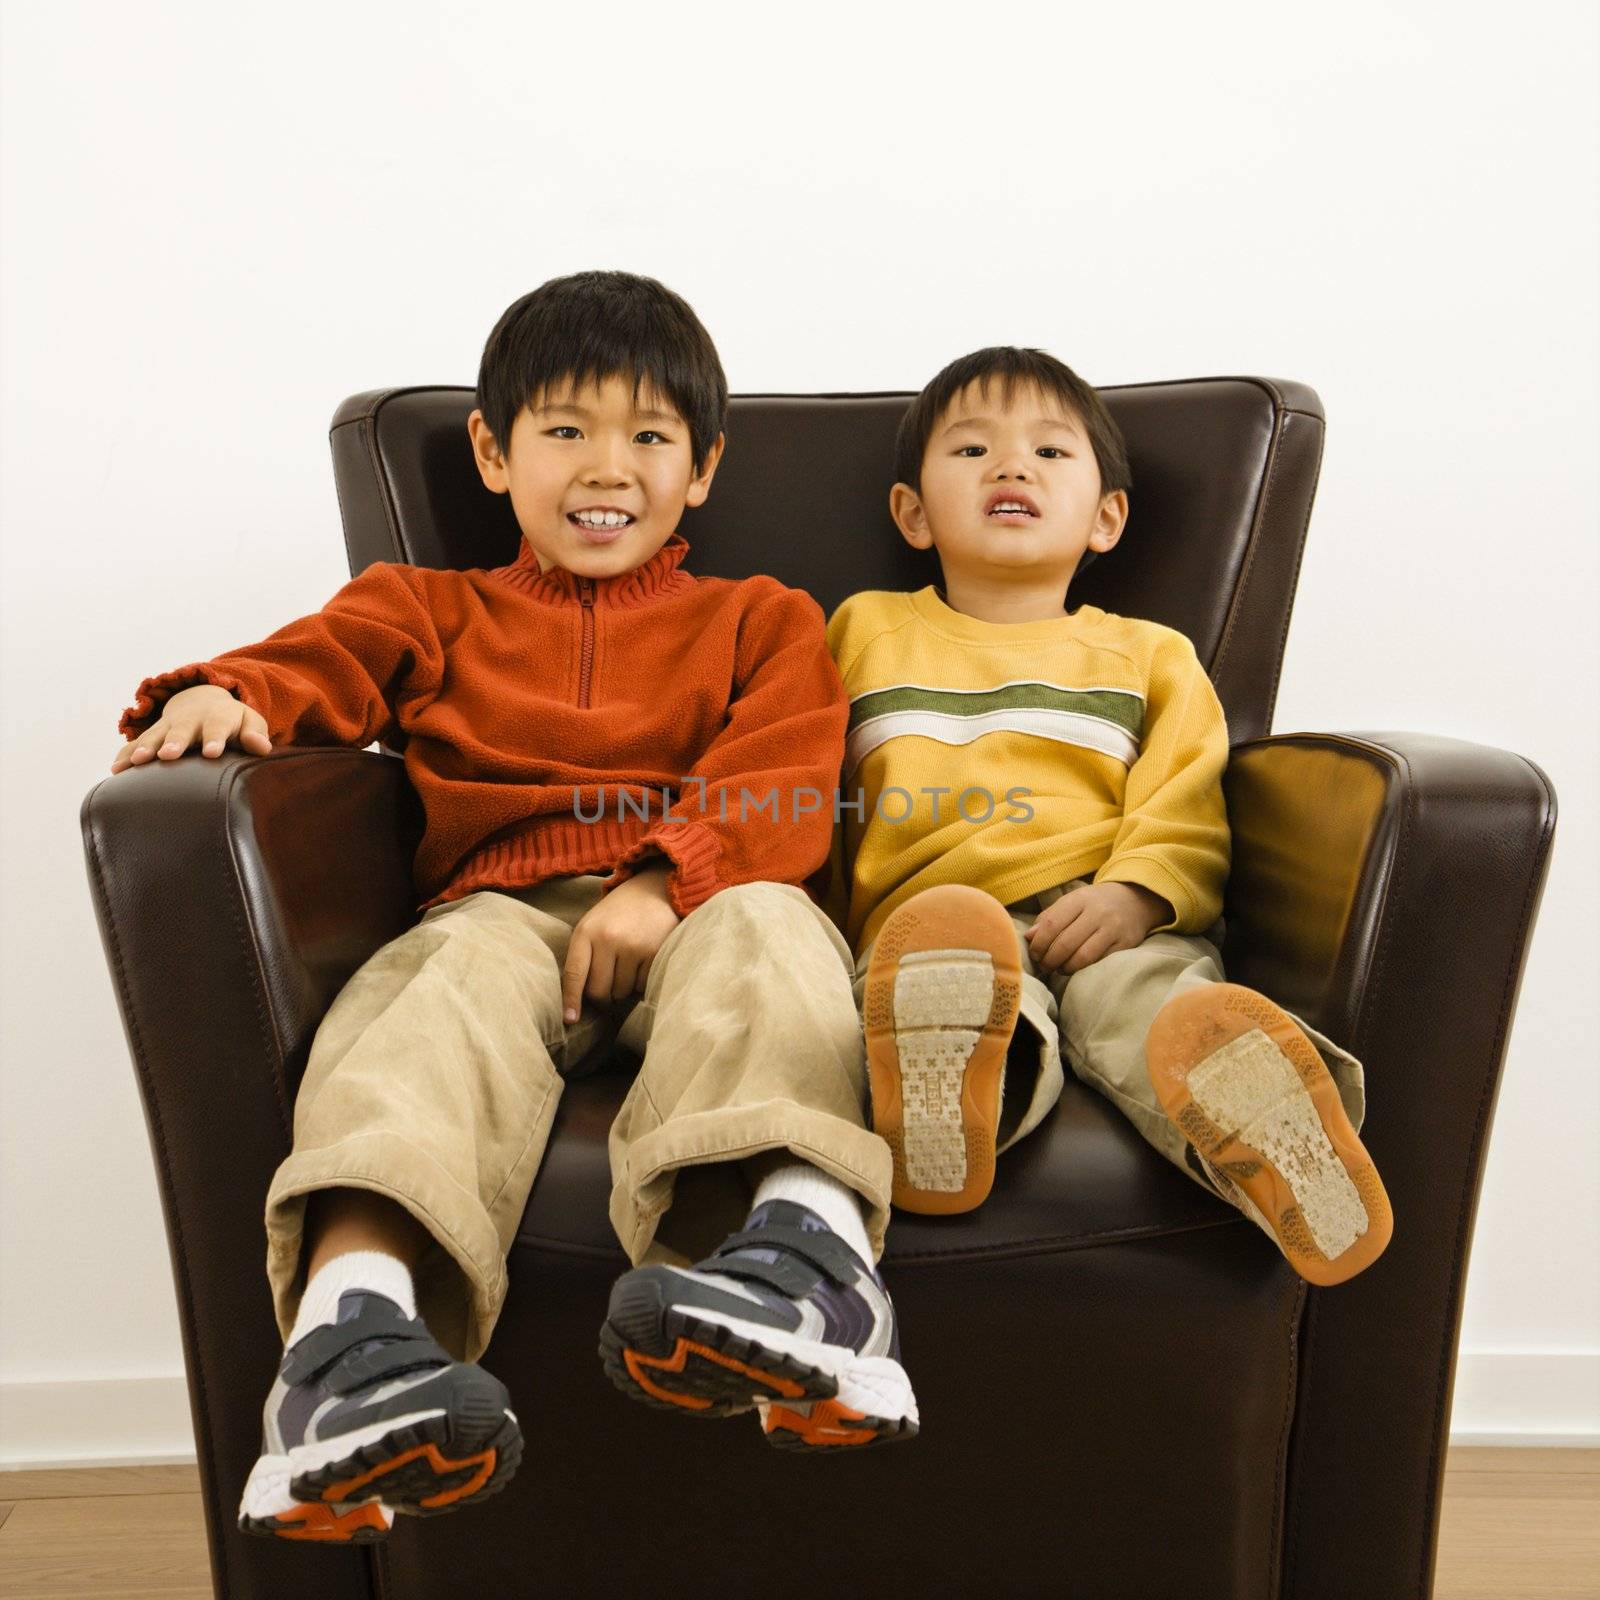 Two Asian brothers sitting in chair smiling.